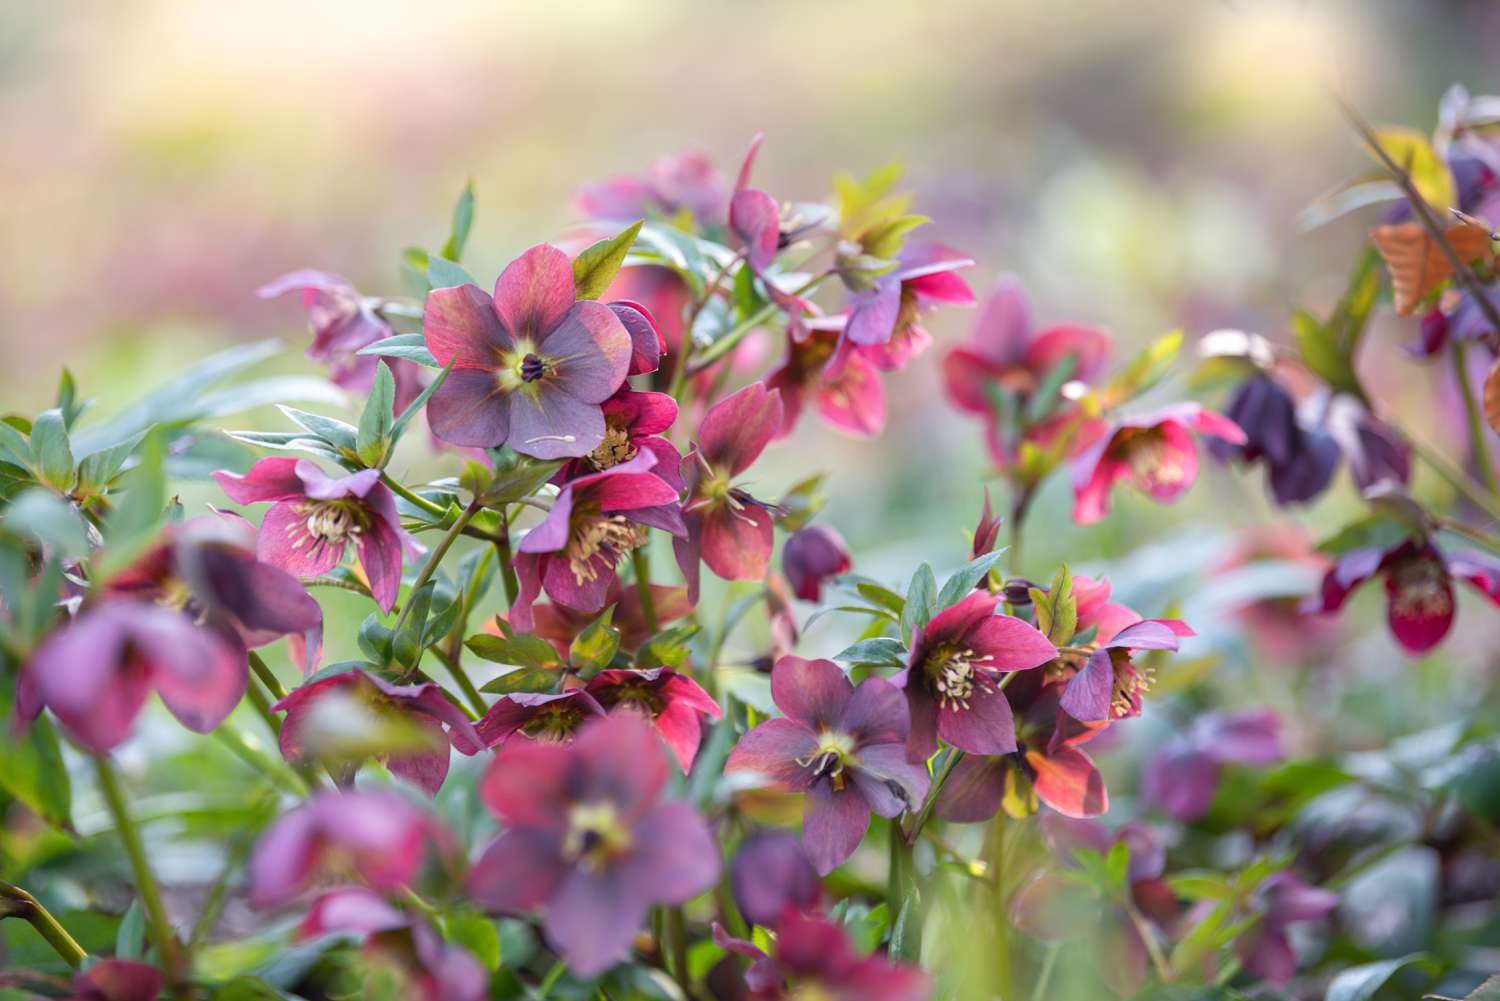 Hellebore flowers with deep purple and pink blossoms in shade garden